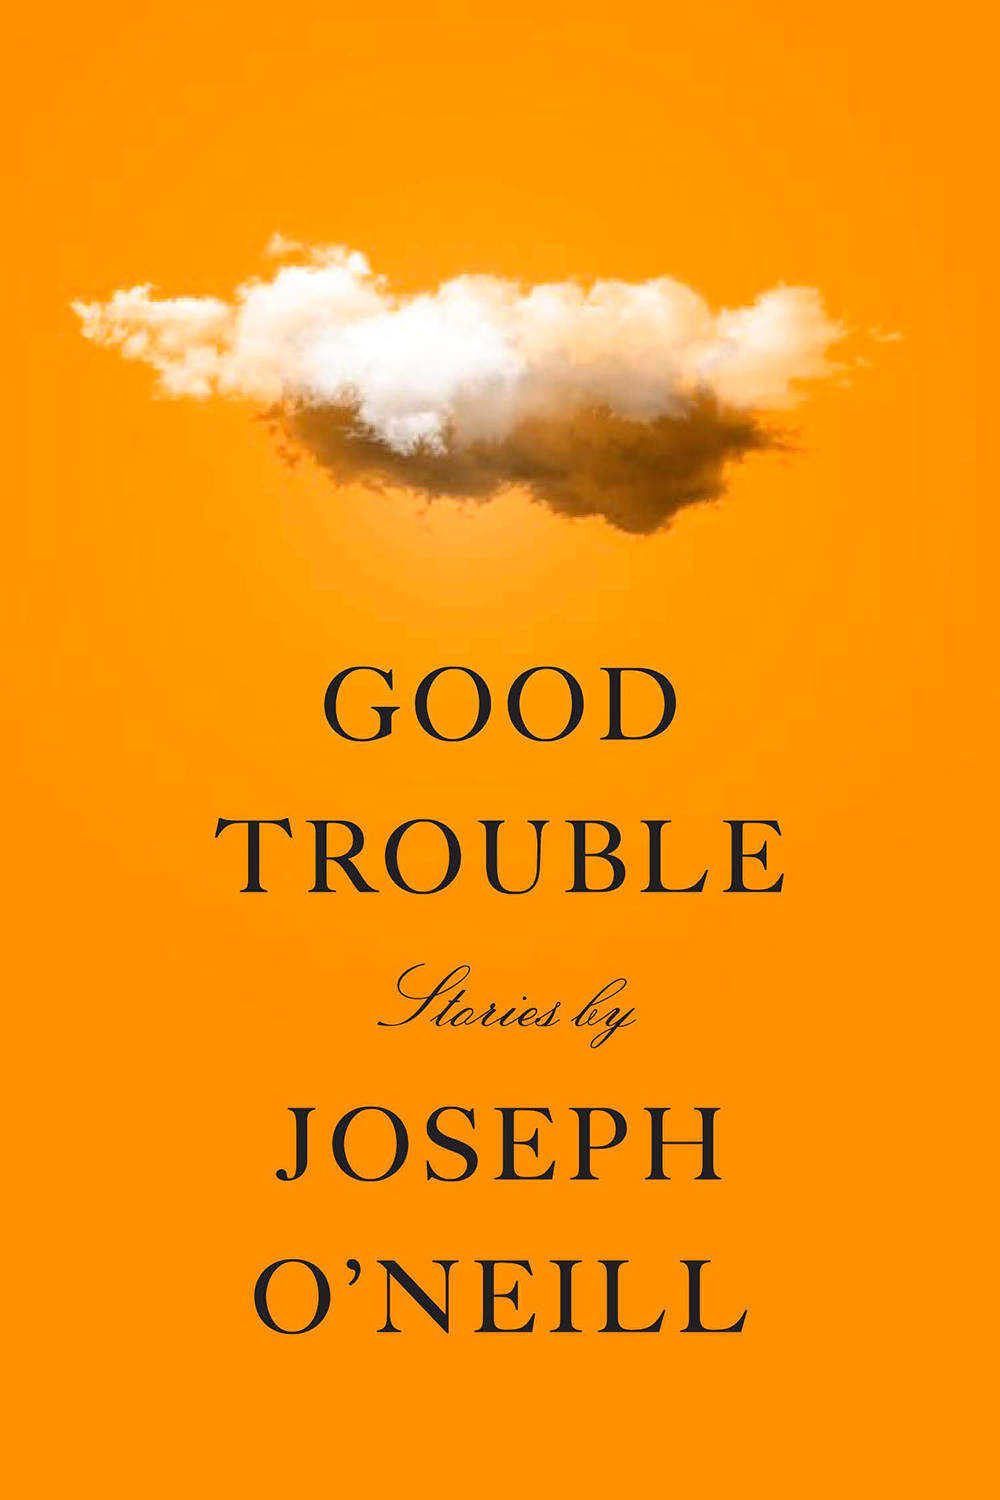 Good Trouble, stories by Joseph O'Neill